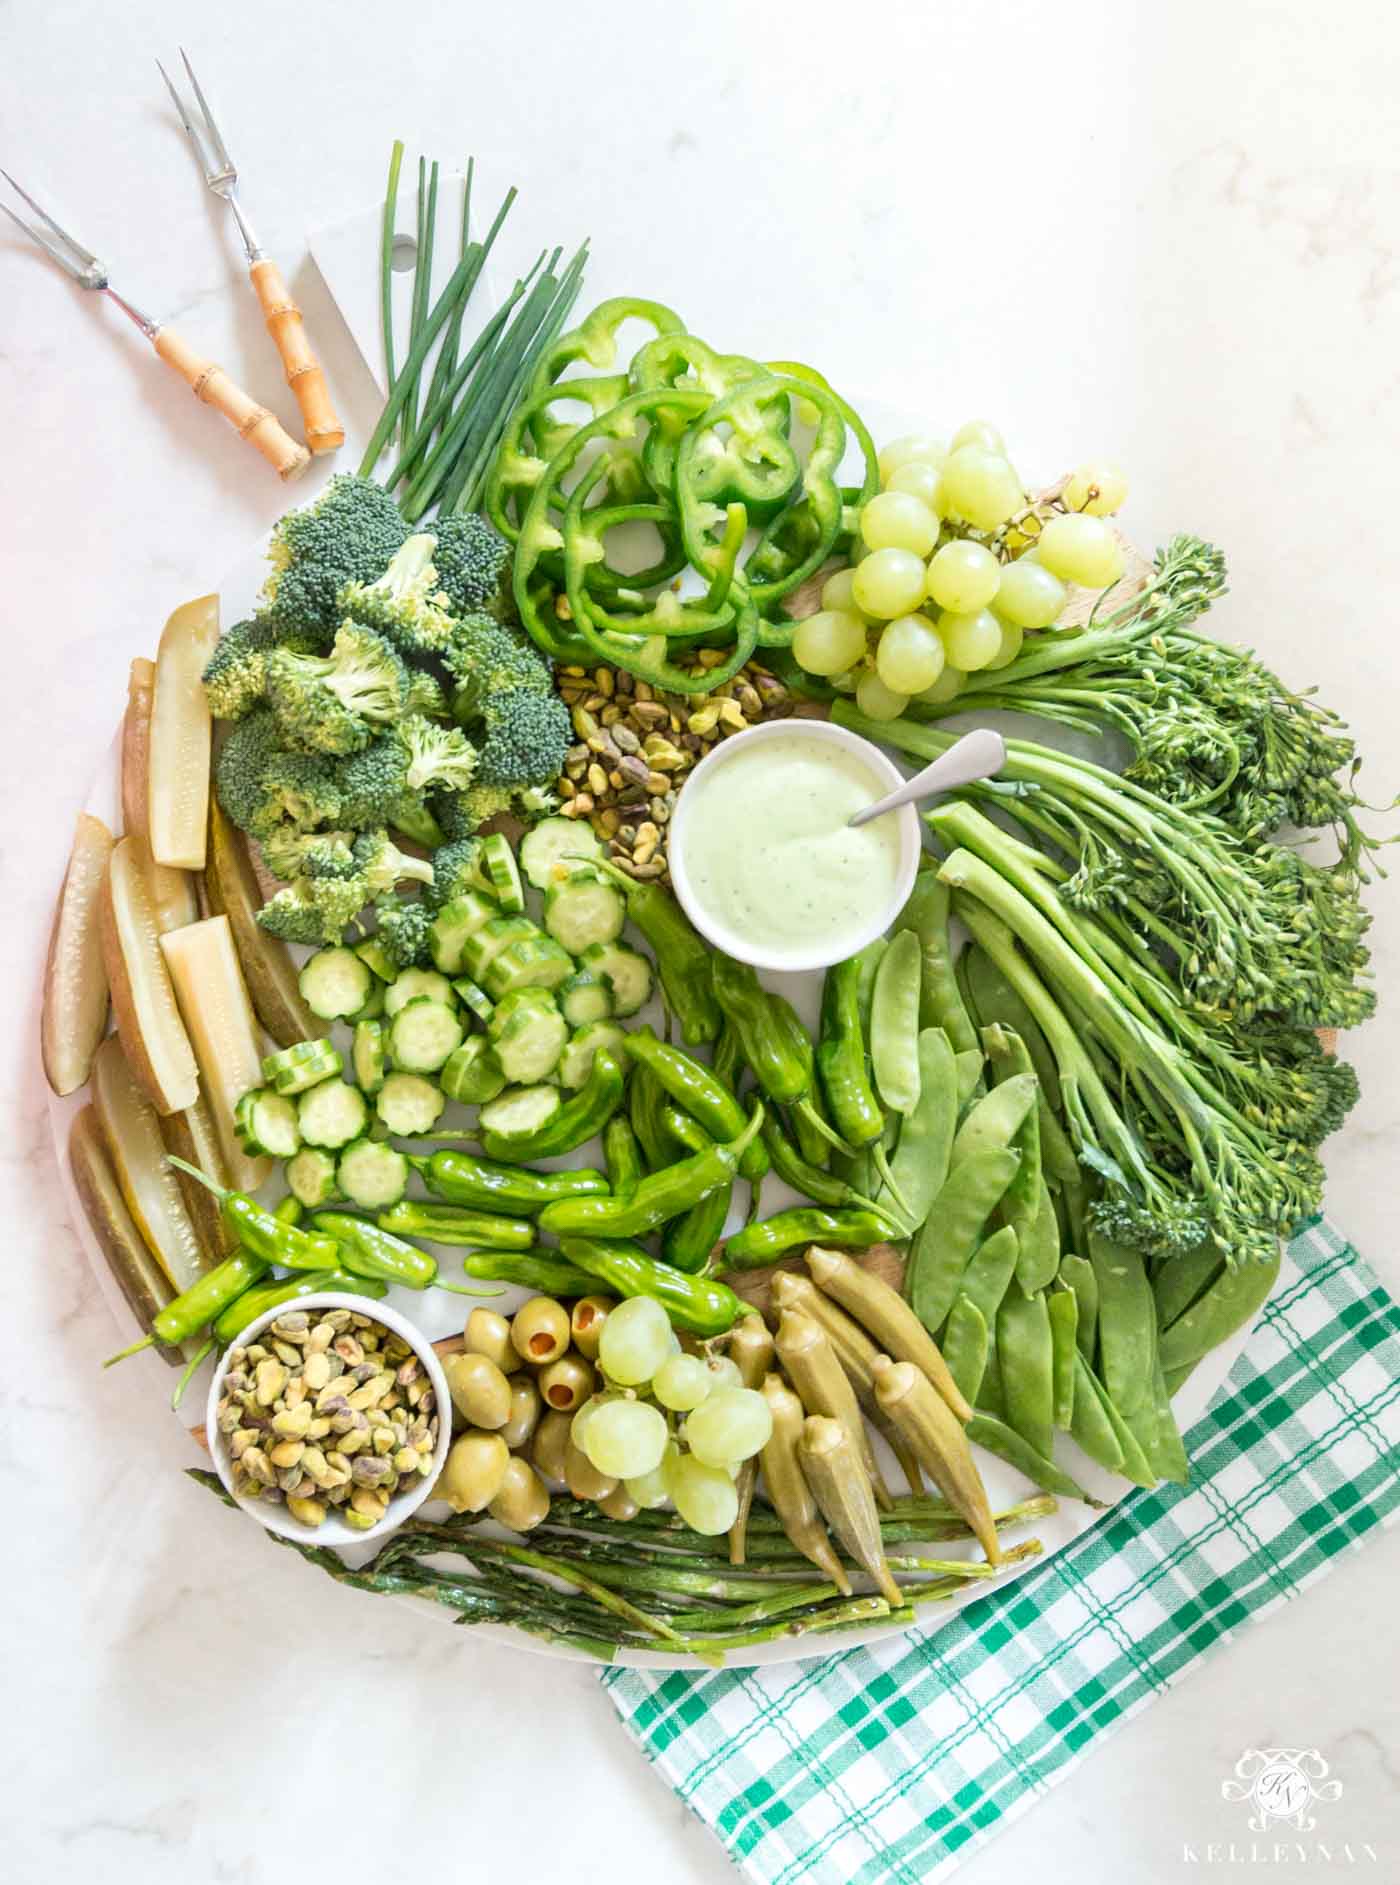 All green vegetable board for St. Patrick's Day food, plus, two other charcuterie cheese and fruit tray ideas